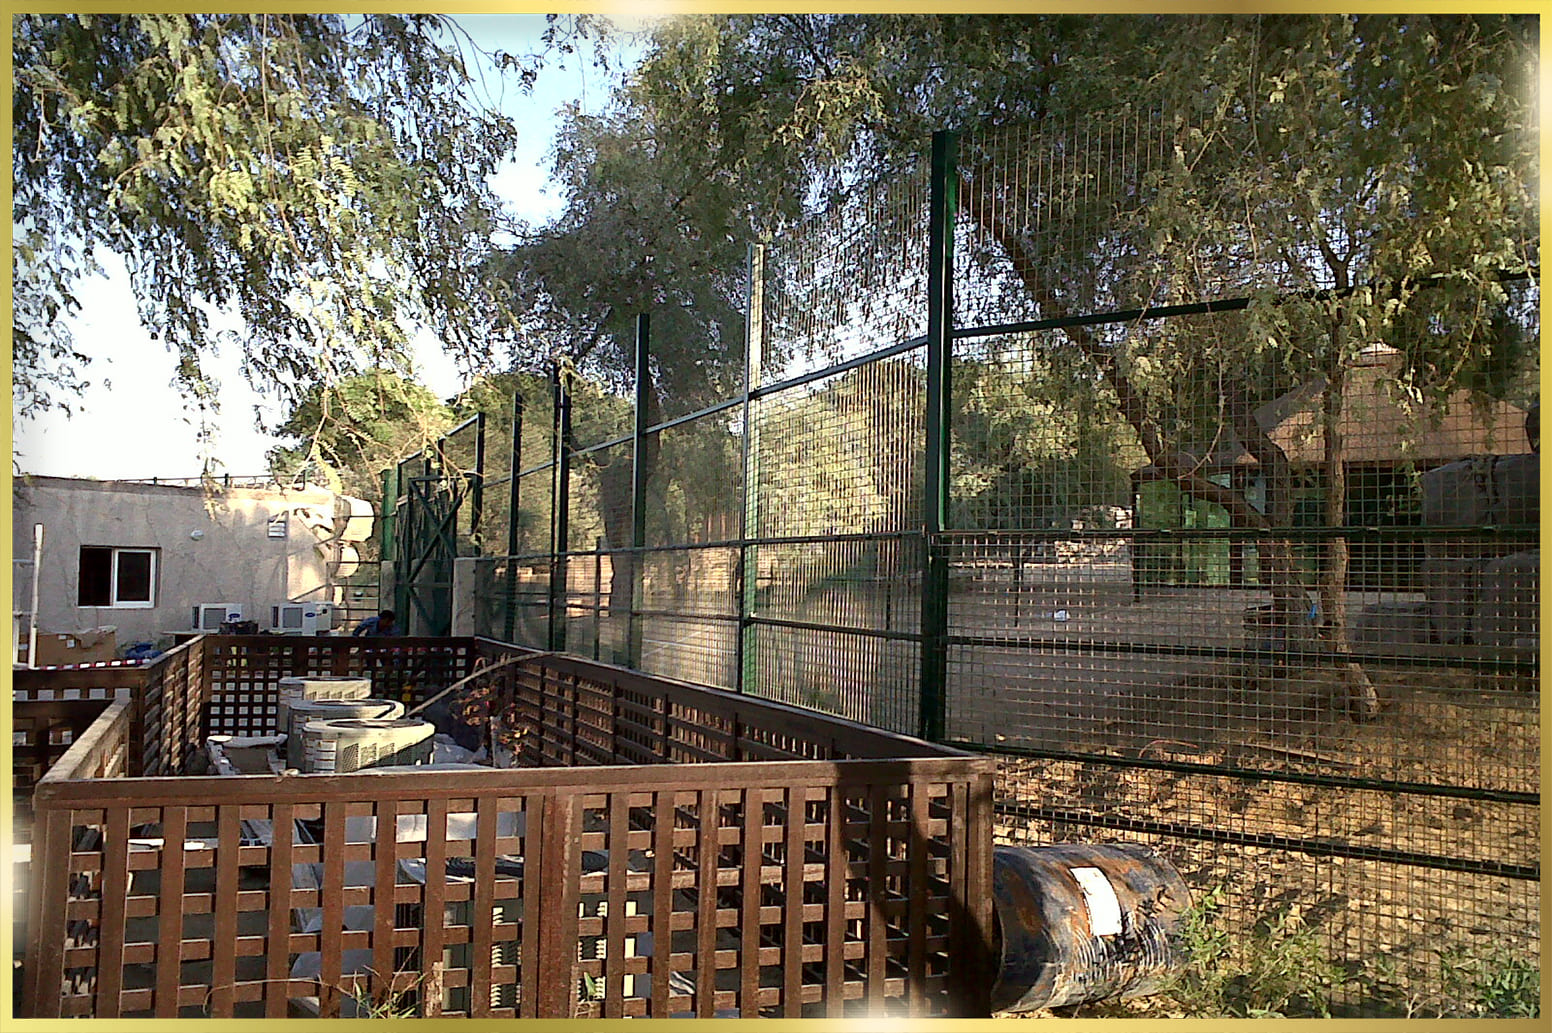 Stainless Steel Animal Housing Contractors for Crowne Prince Zoo